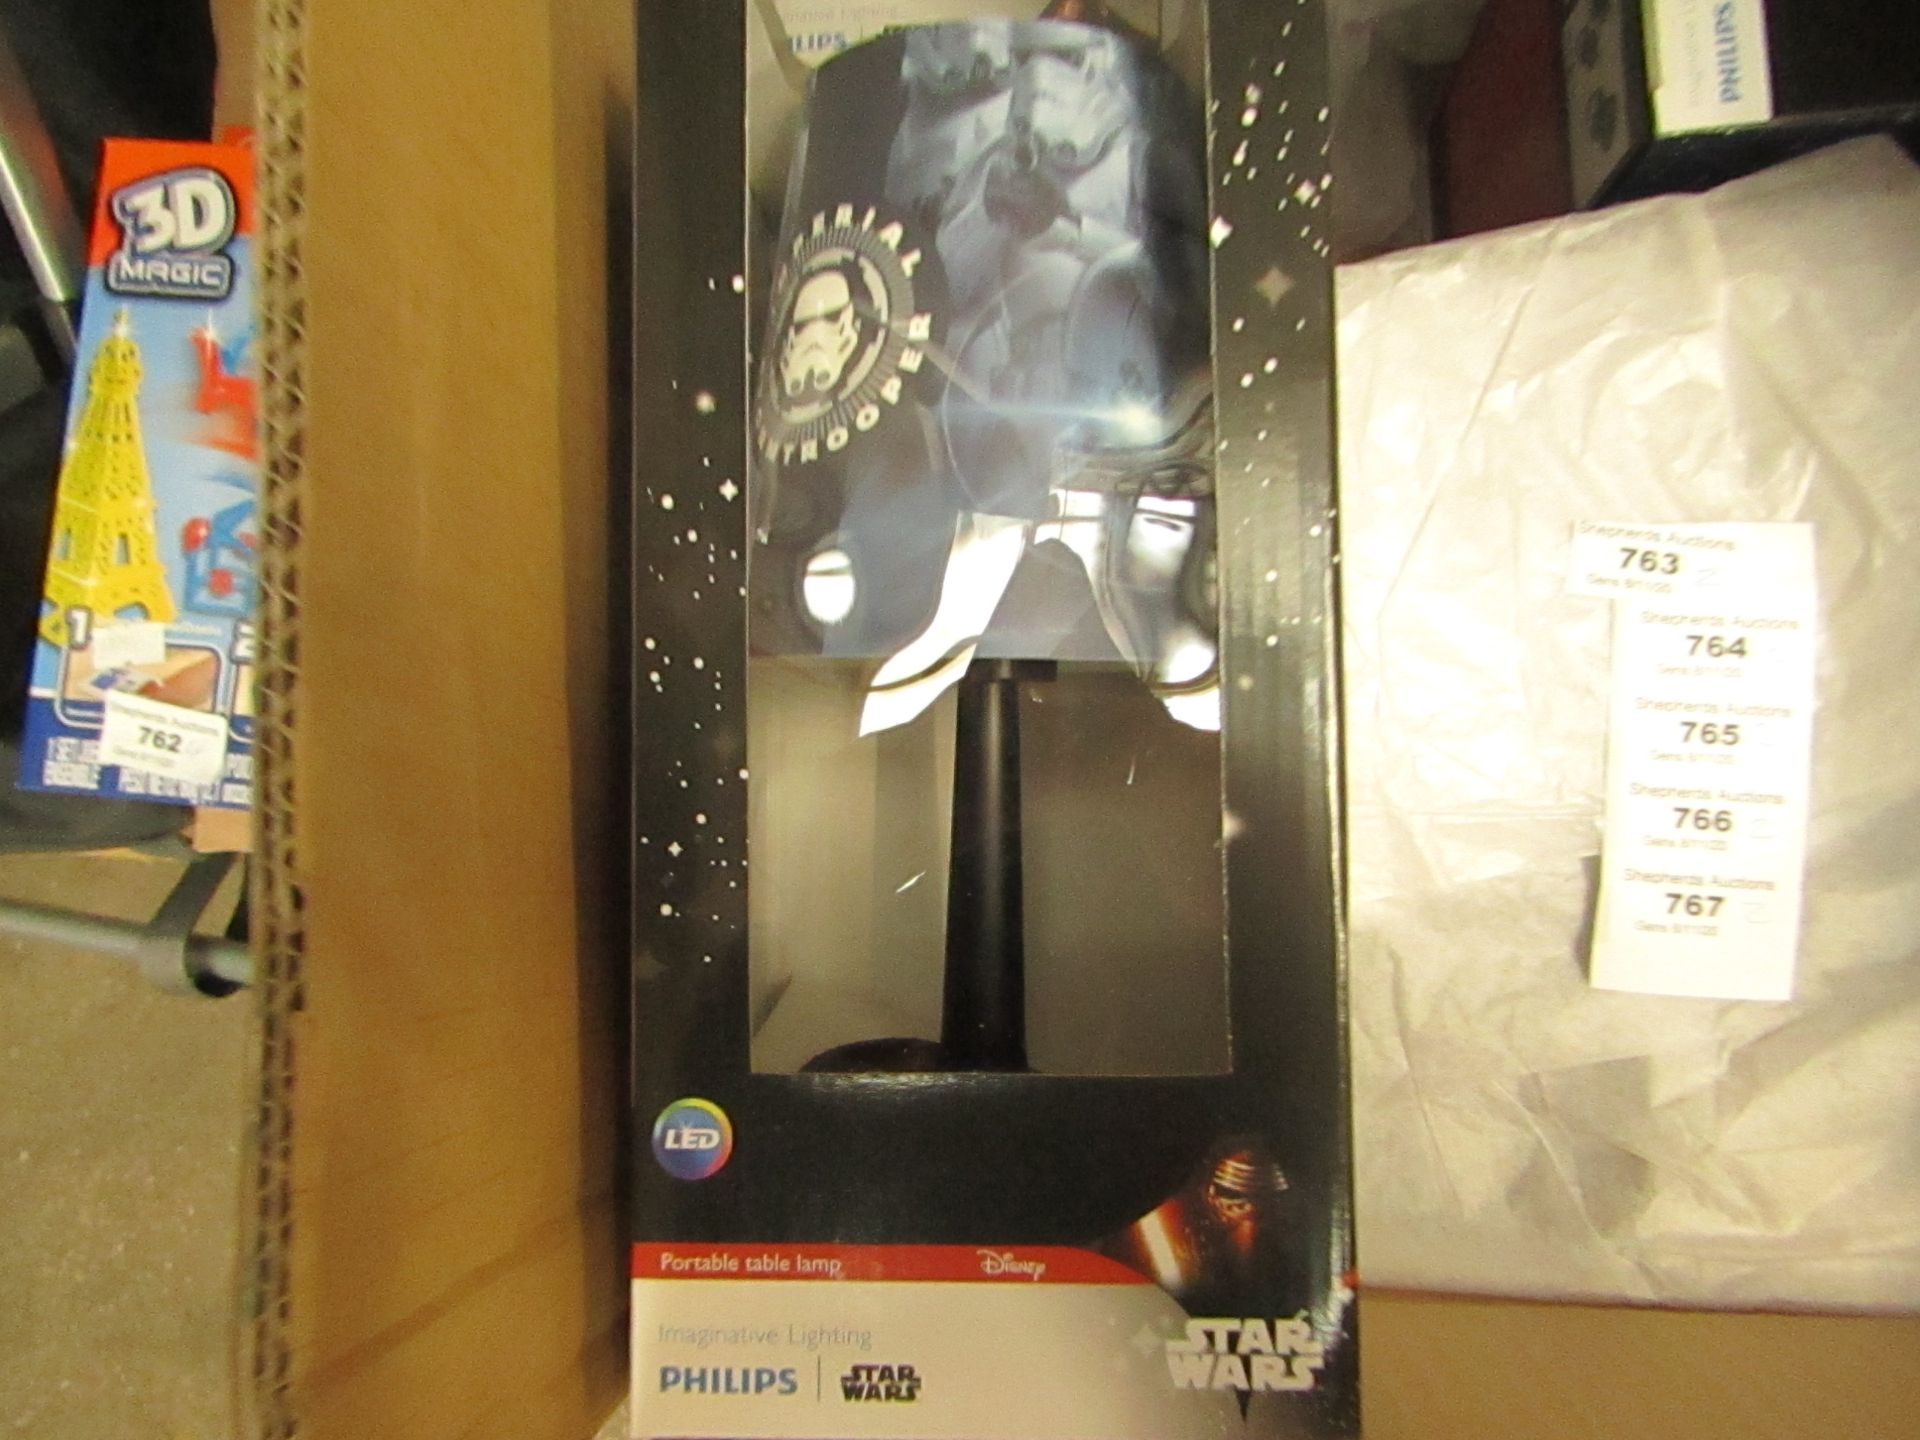 2x Phillips Star wars Table Lamps, boxed and unused bu the packaging has gotten a bit damged, the